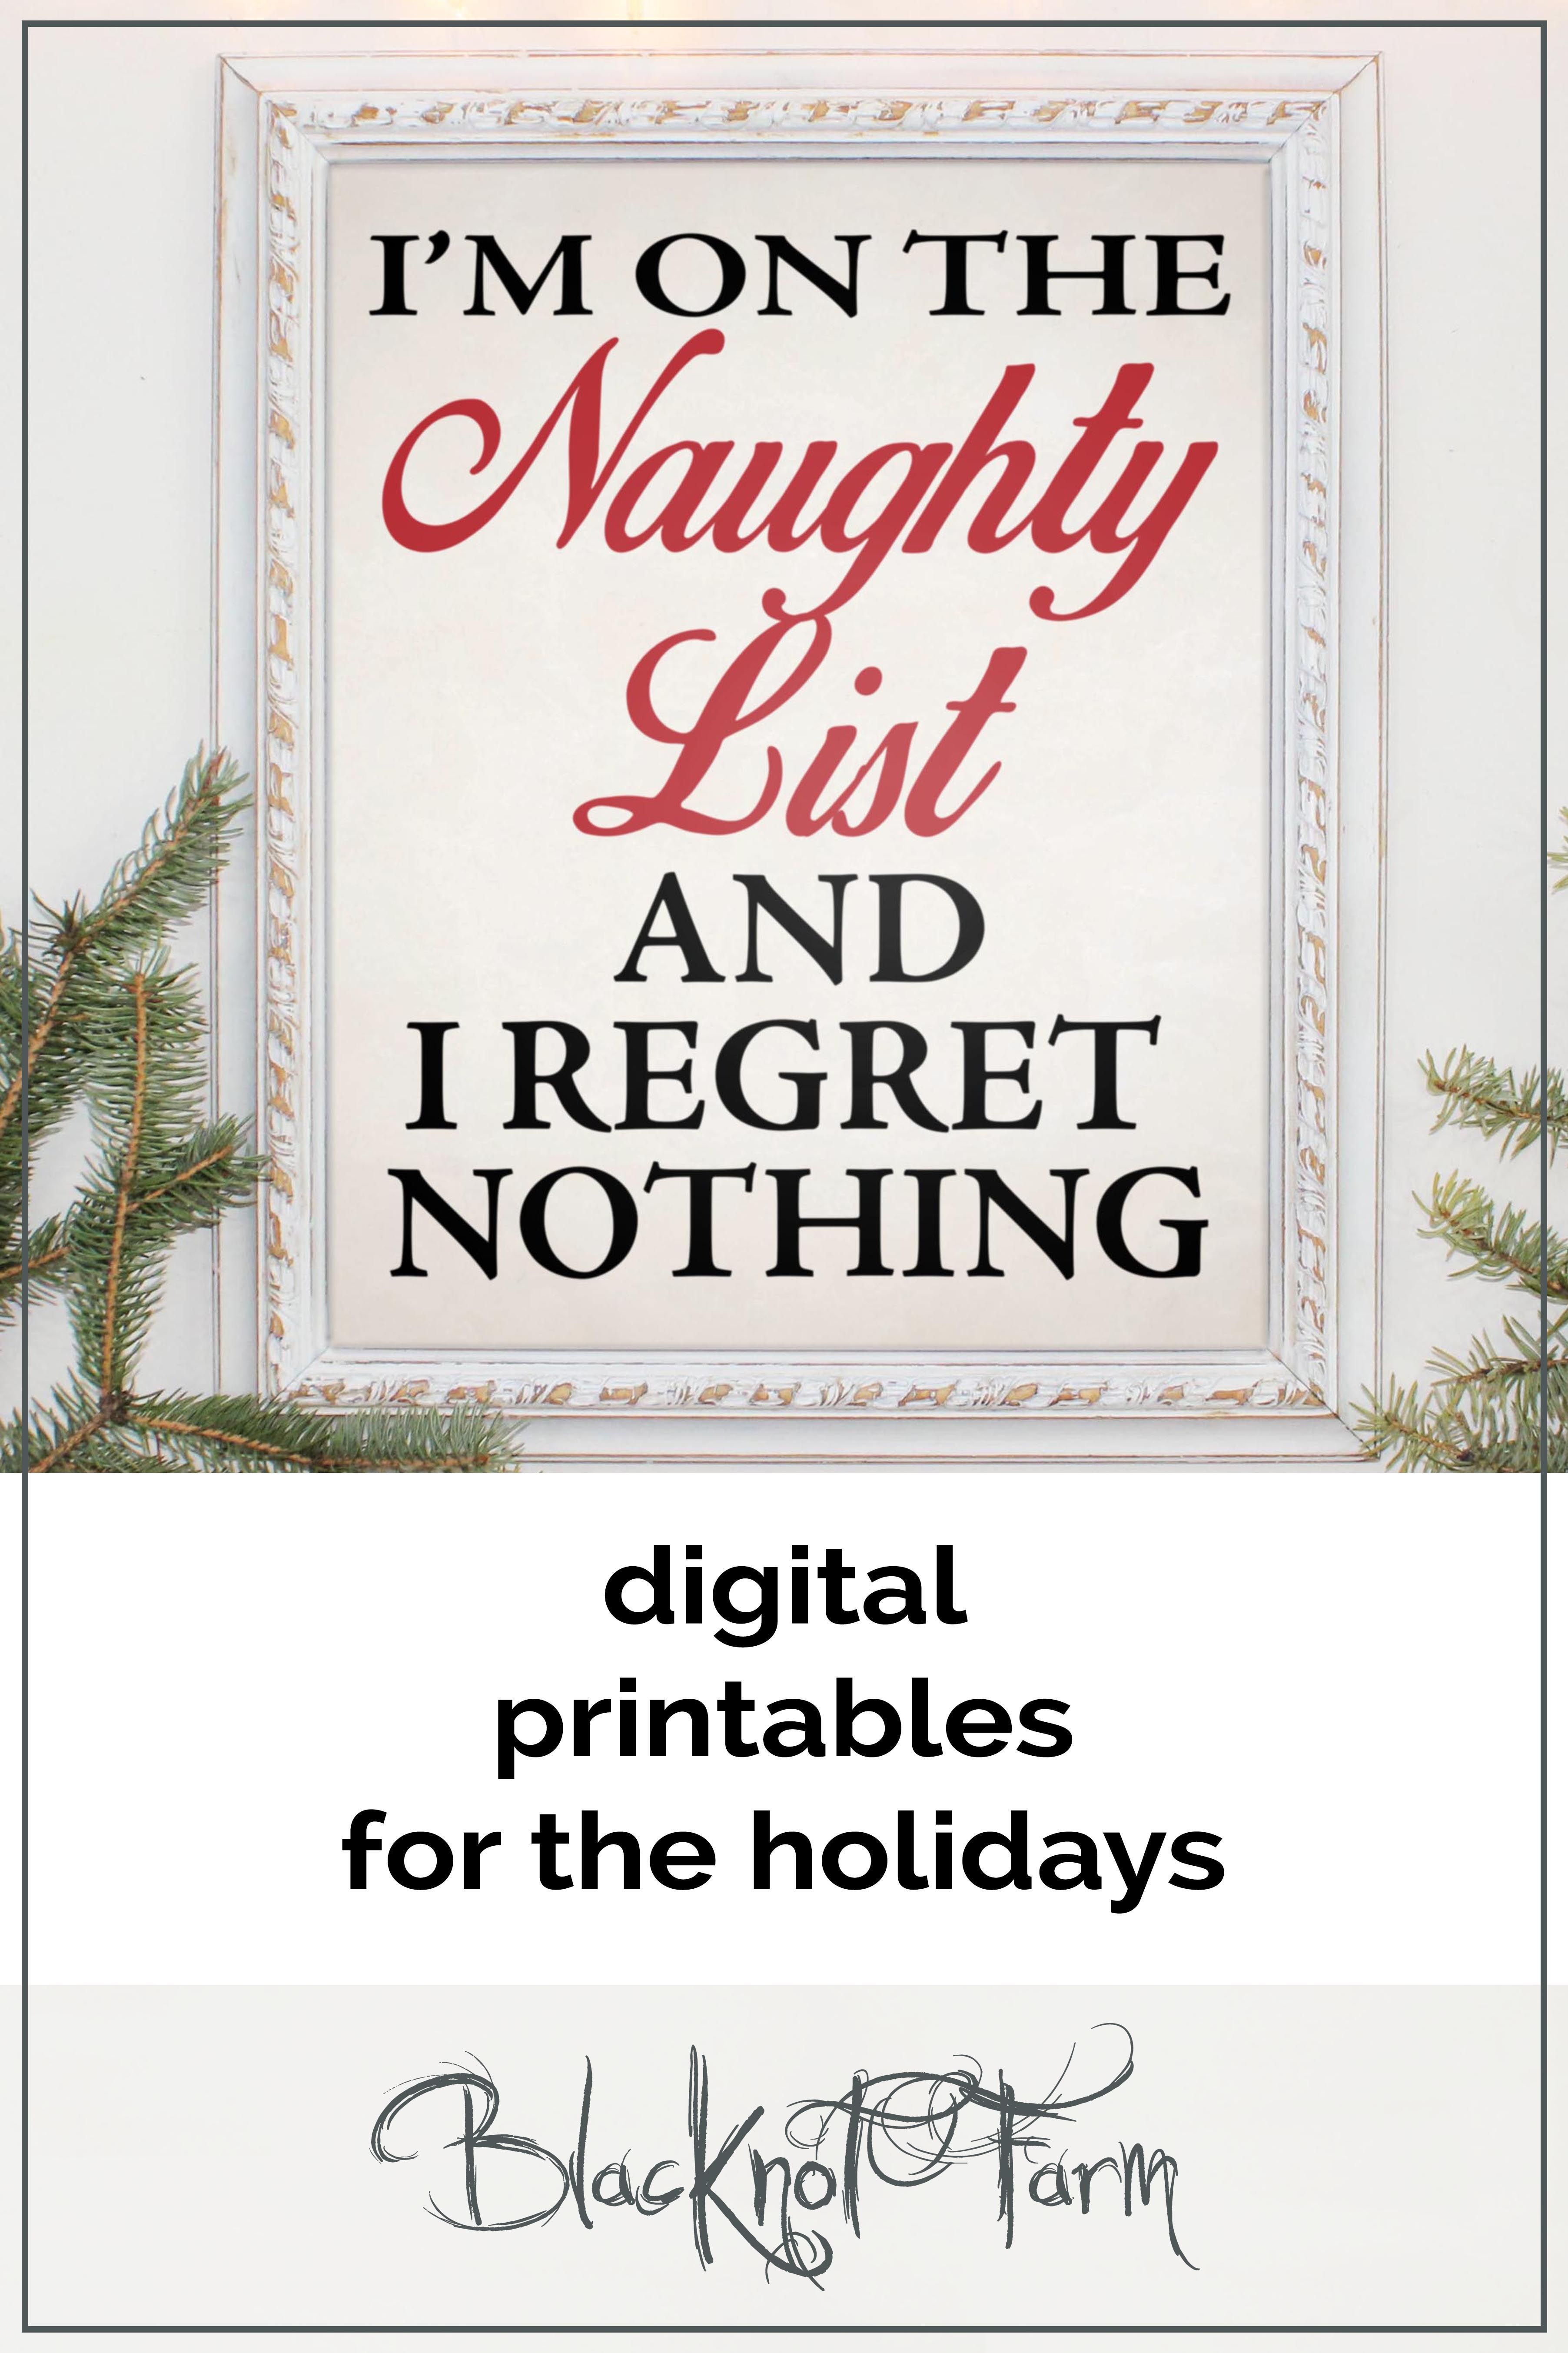 17 holiday Sayings link ideas